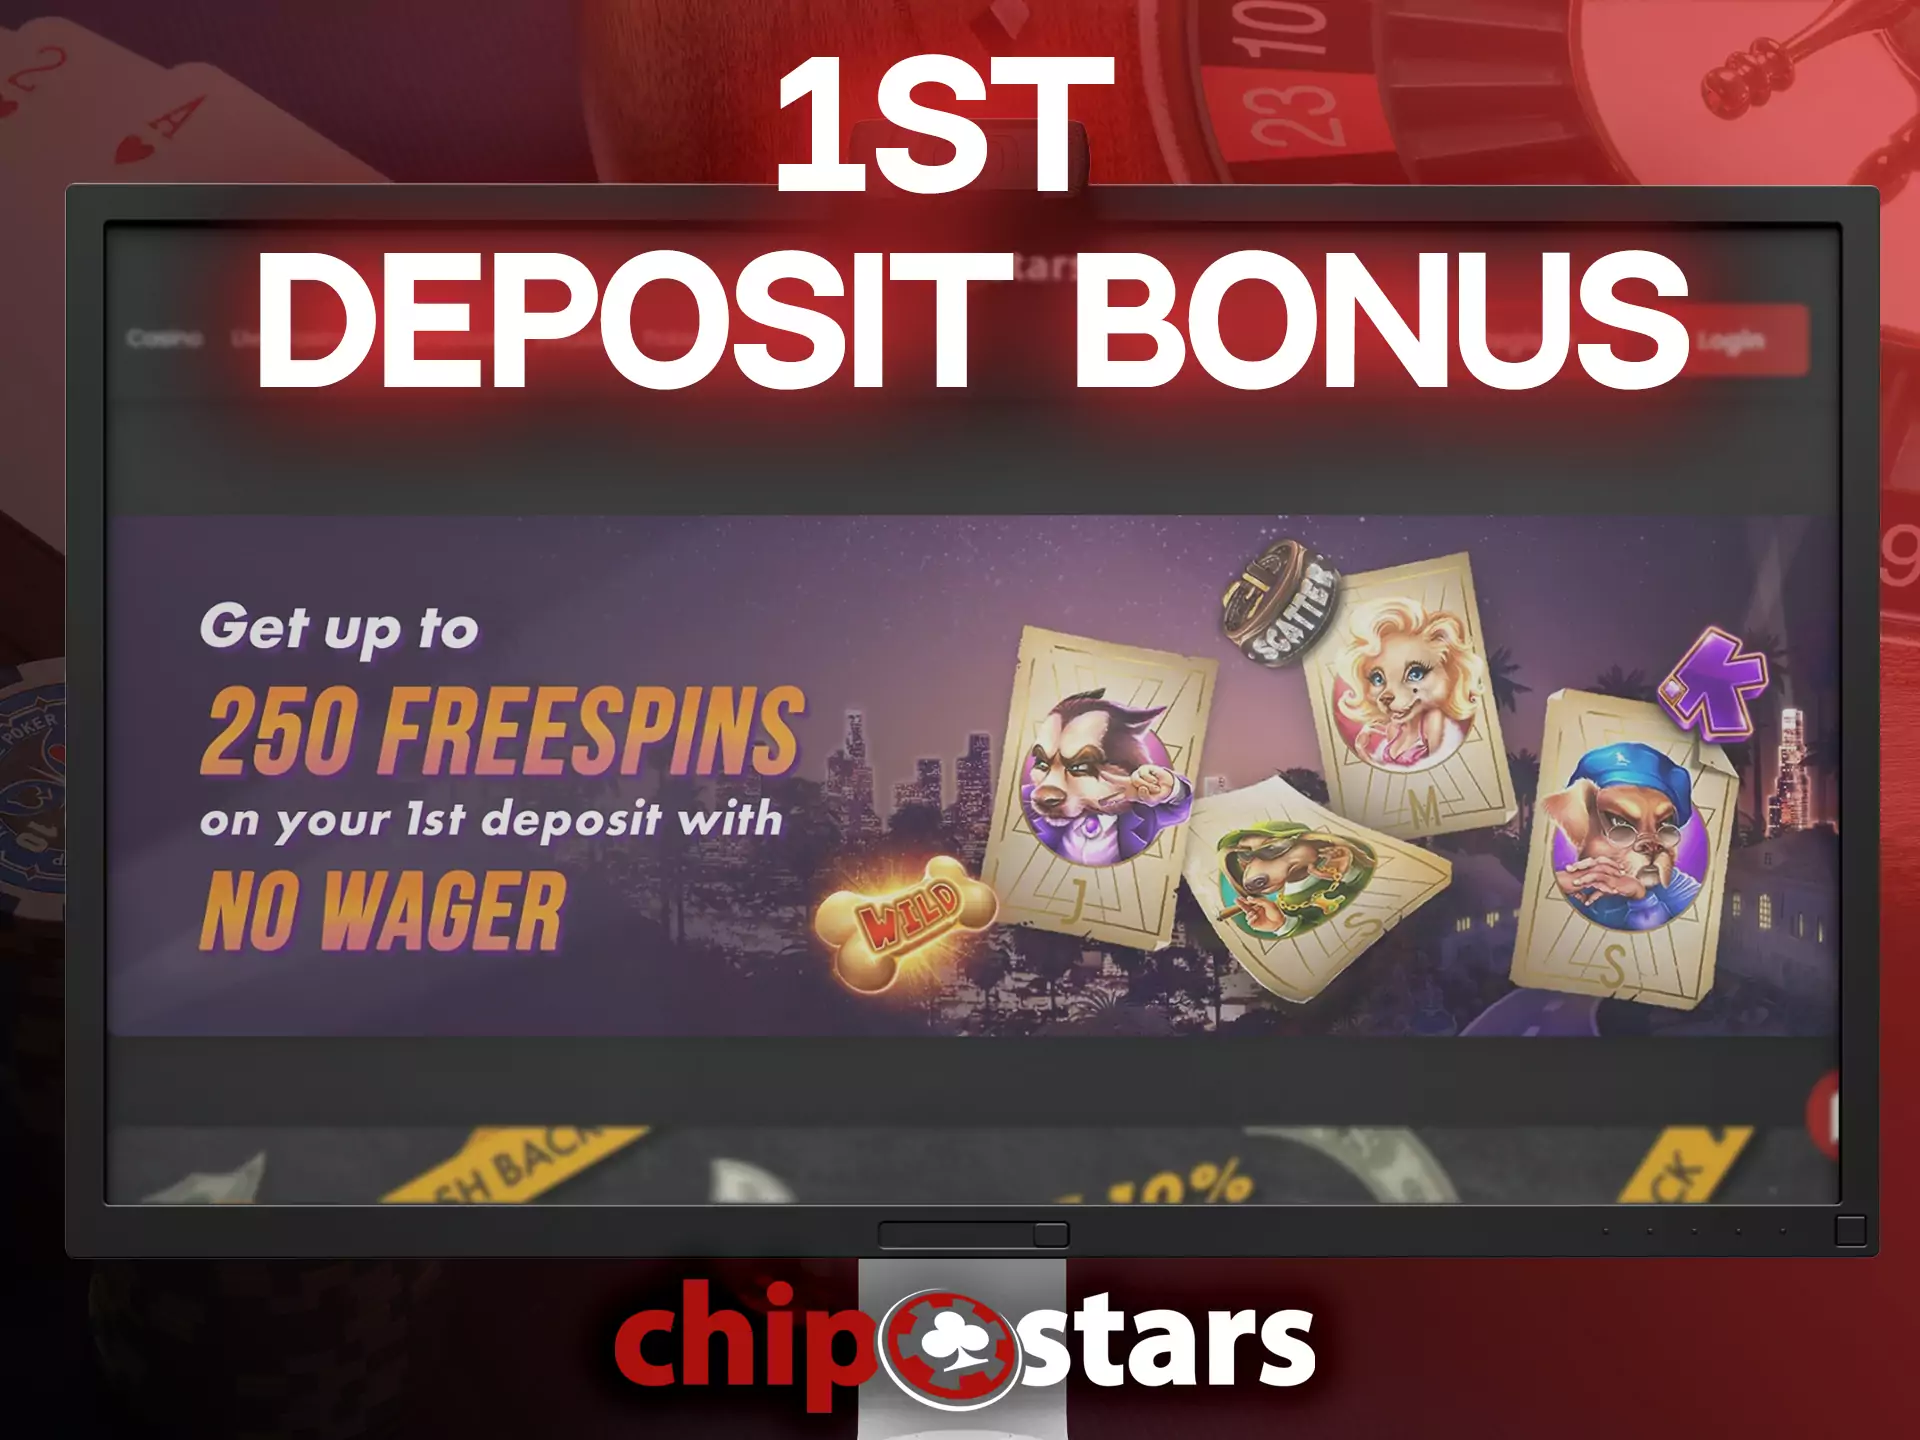 Newcomers get a special bonus on the first deposit from Chipstars.